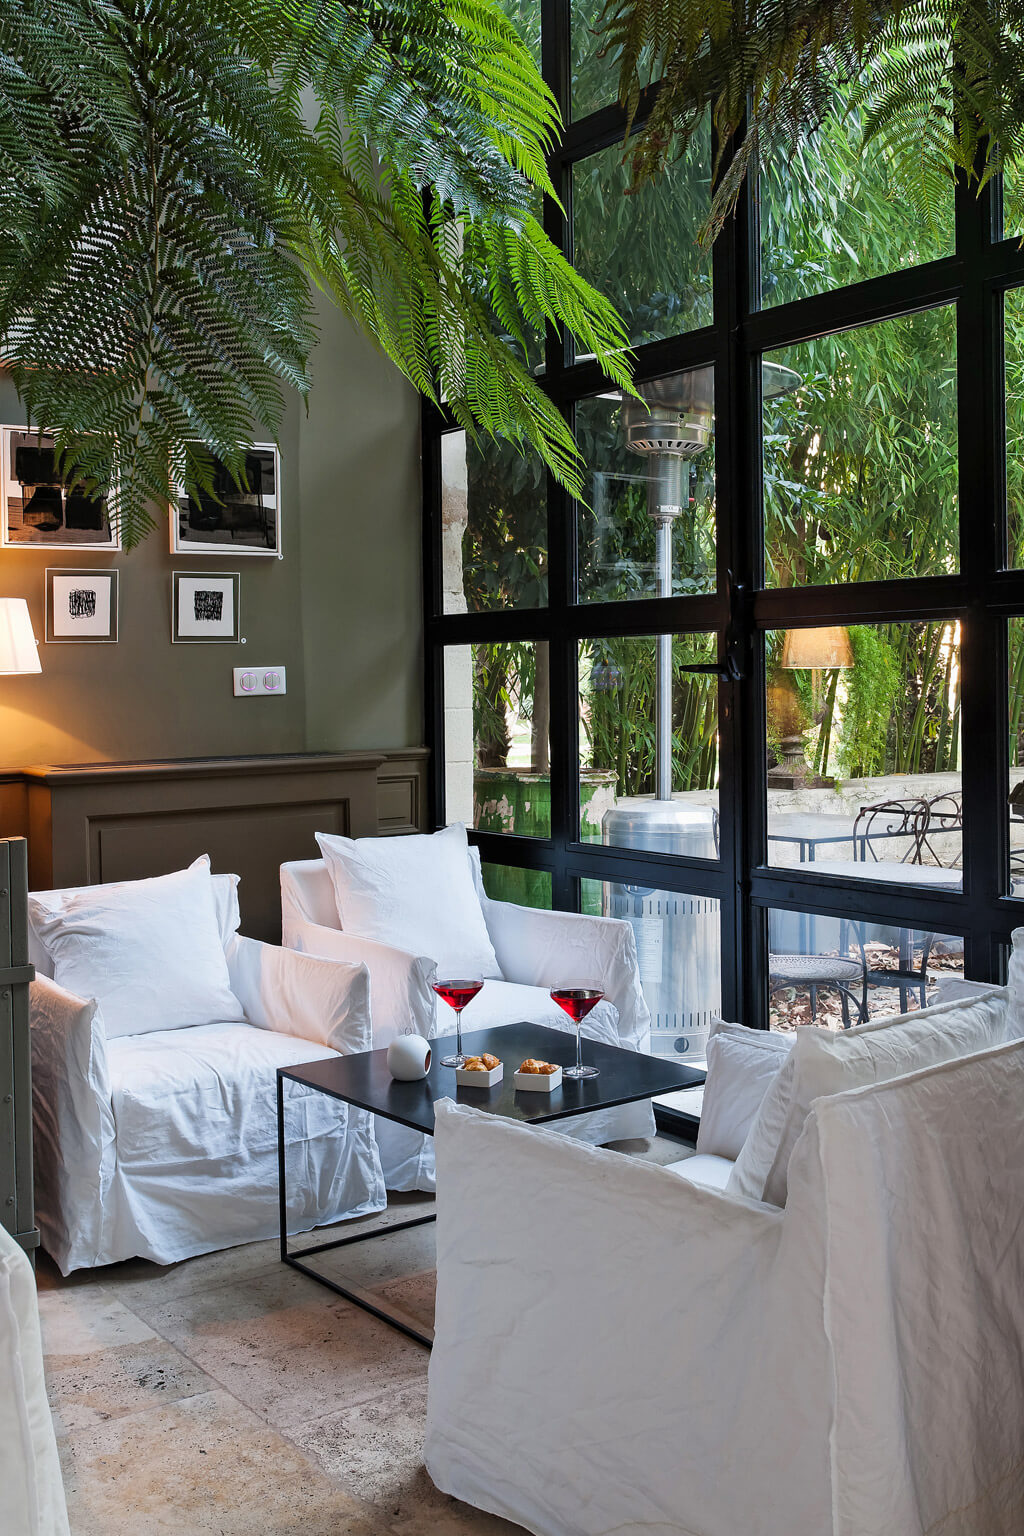 Modern French interior design inspiration from a luxurious property in the South of France. Photo: Haven In. Avignon Hotel Particulier.